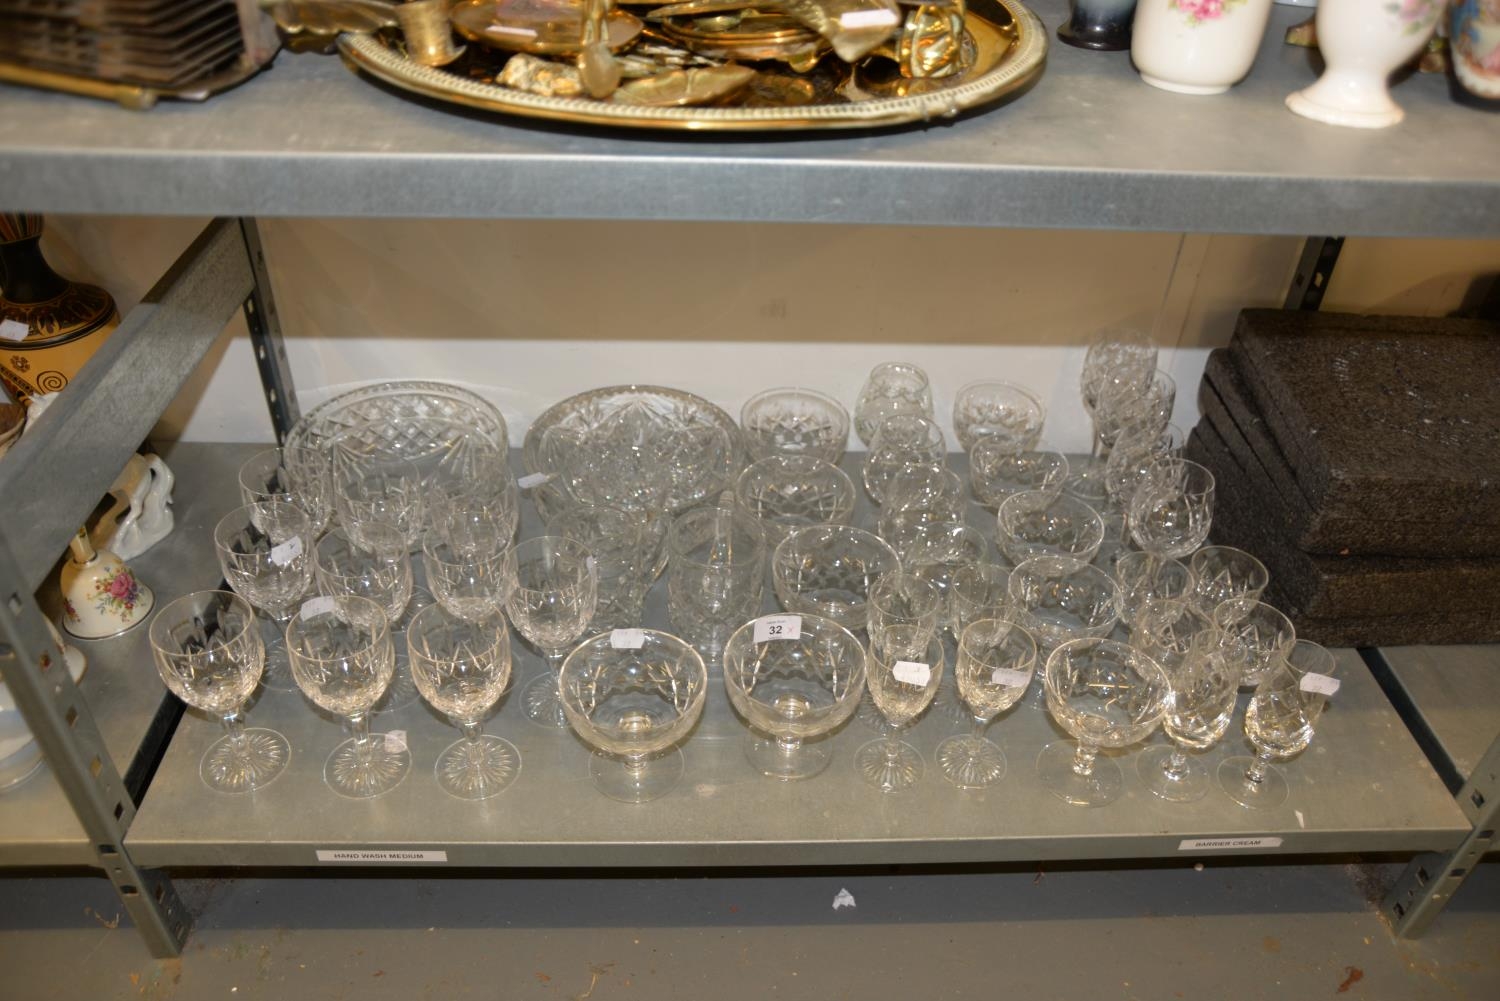 A GOOD SELECTION OF CUT GLASS WINE GLASSES, BRANDY BALLOONS, WHISKY GLASSES AND TWO CUT GLASS